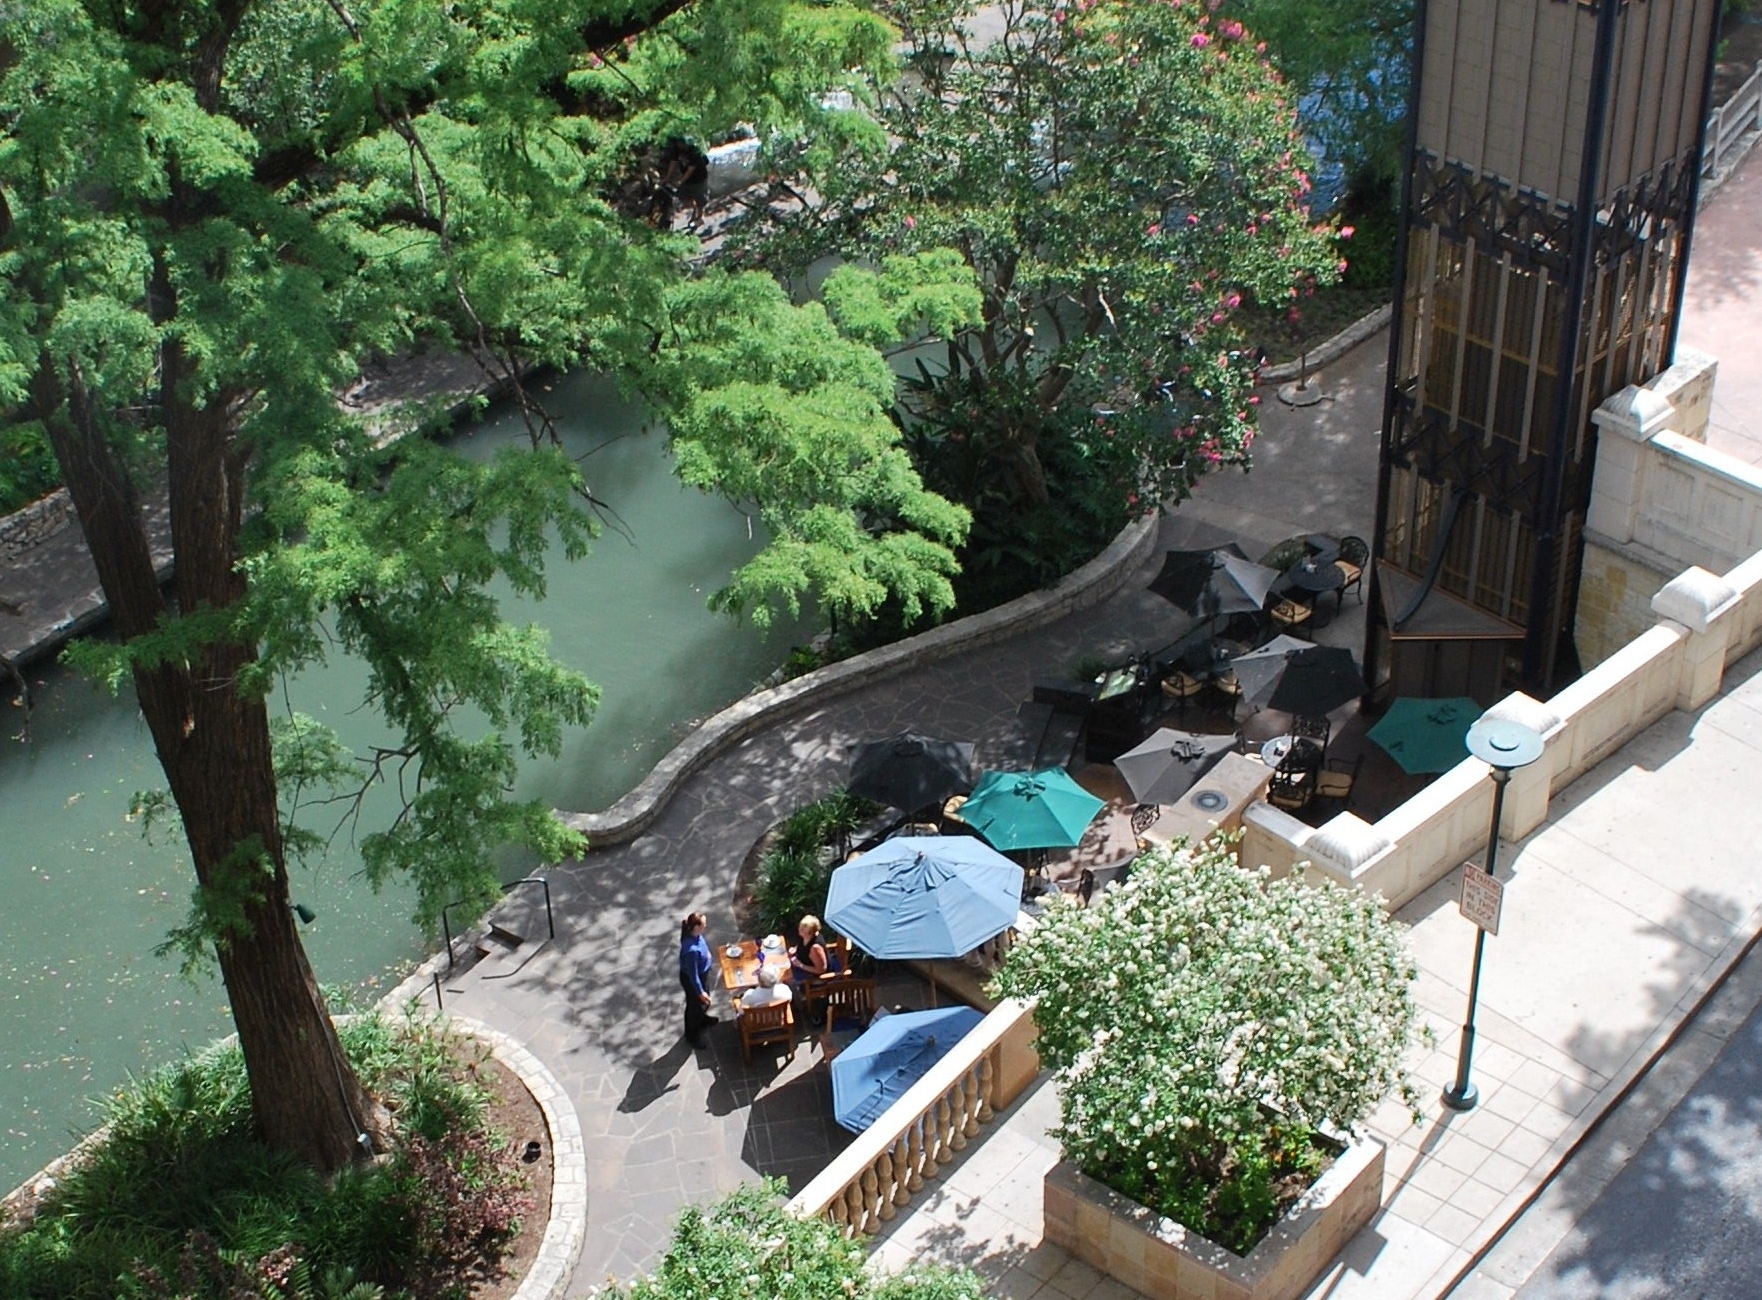 Scenic vacation spot for locals and visitors in historic San Antonio Texas. Man and woman have lunch outside by peaceful small river under colorful umbrellas. These patrons enjoy a quite meal and quaint view in the sunny afternoon.